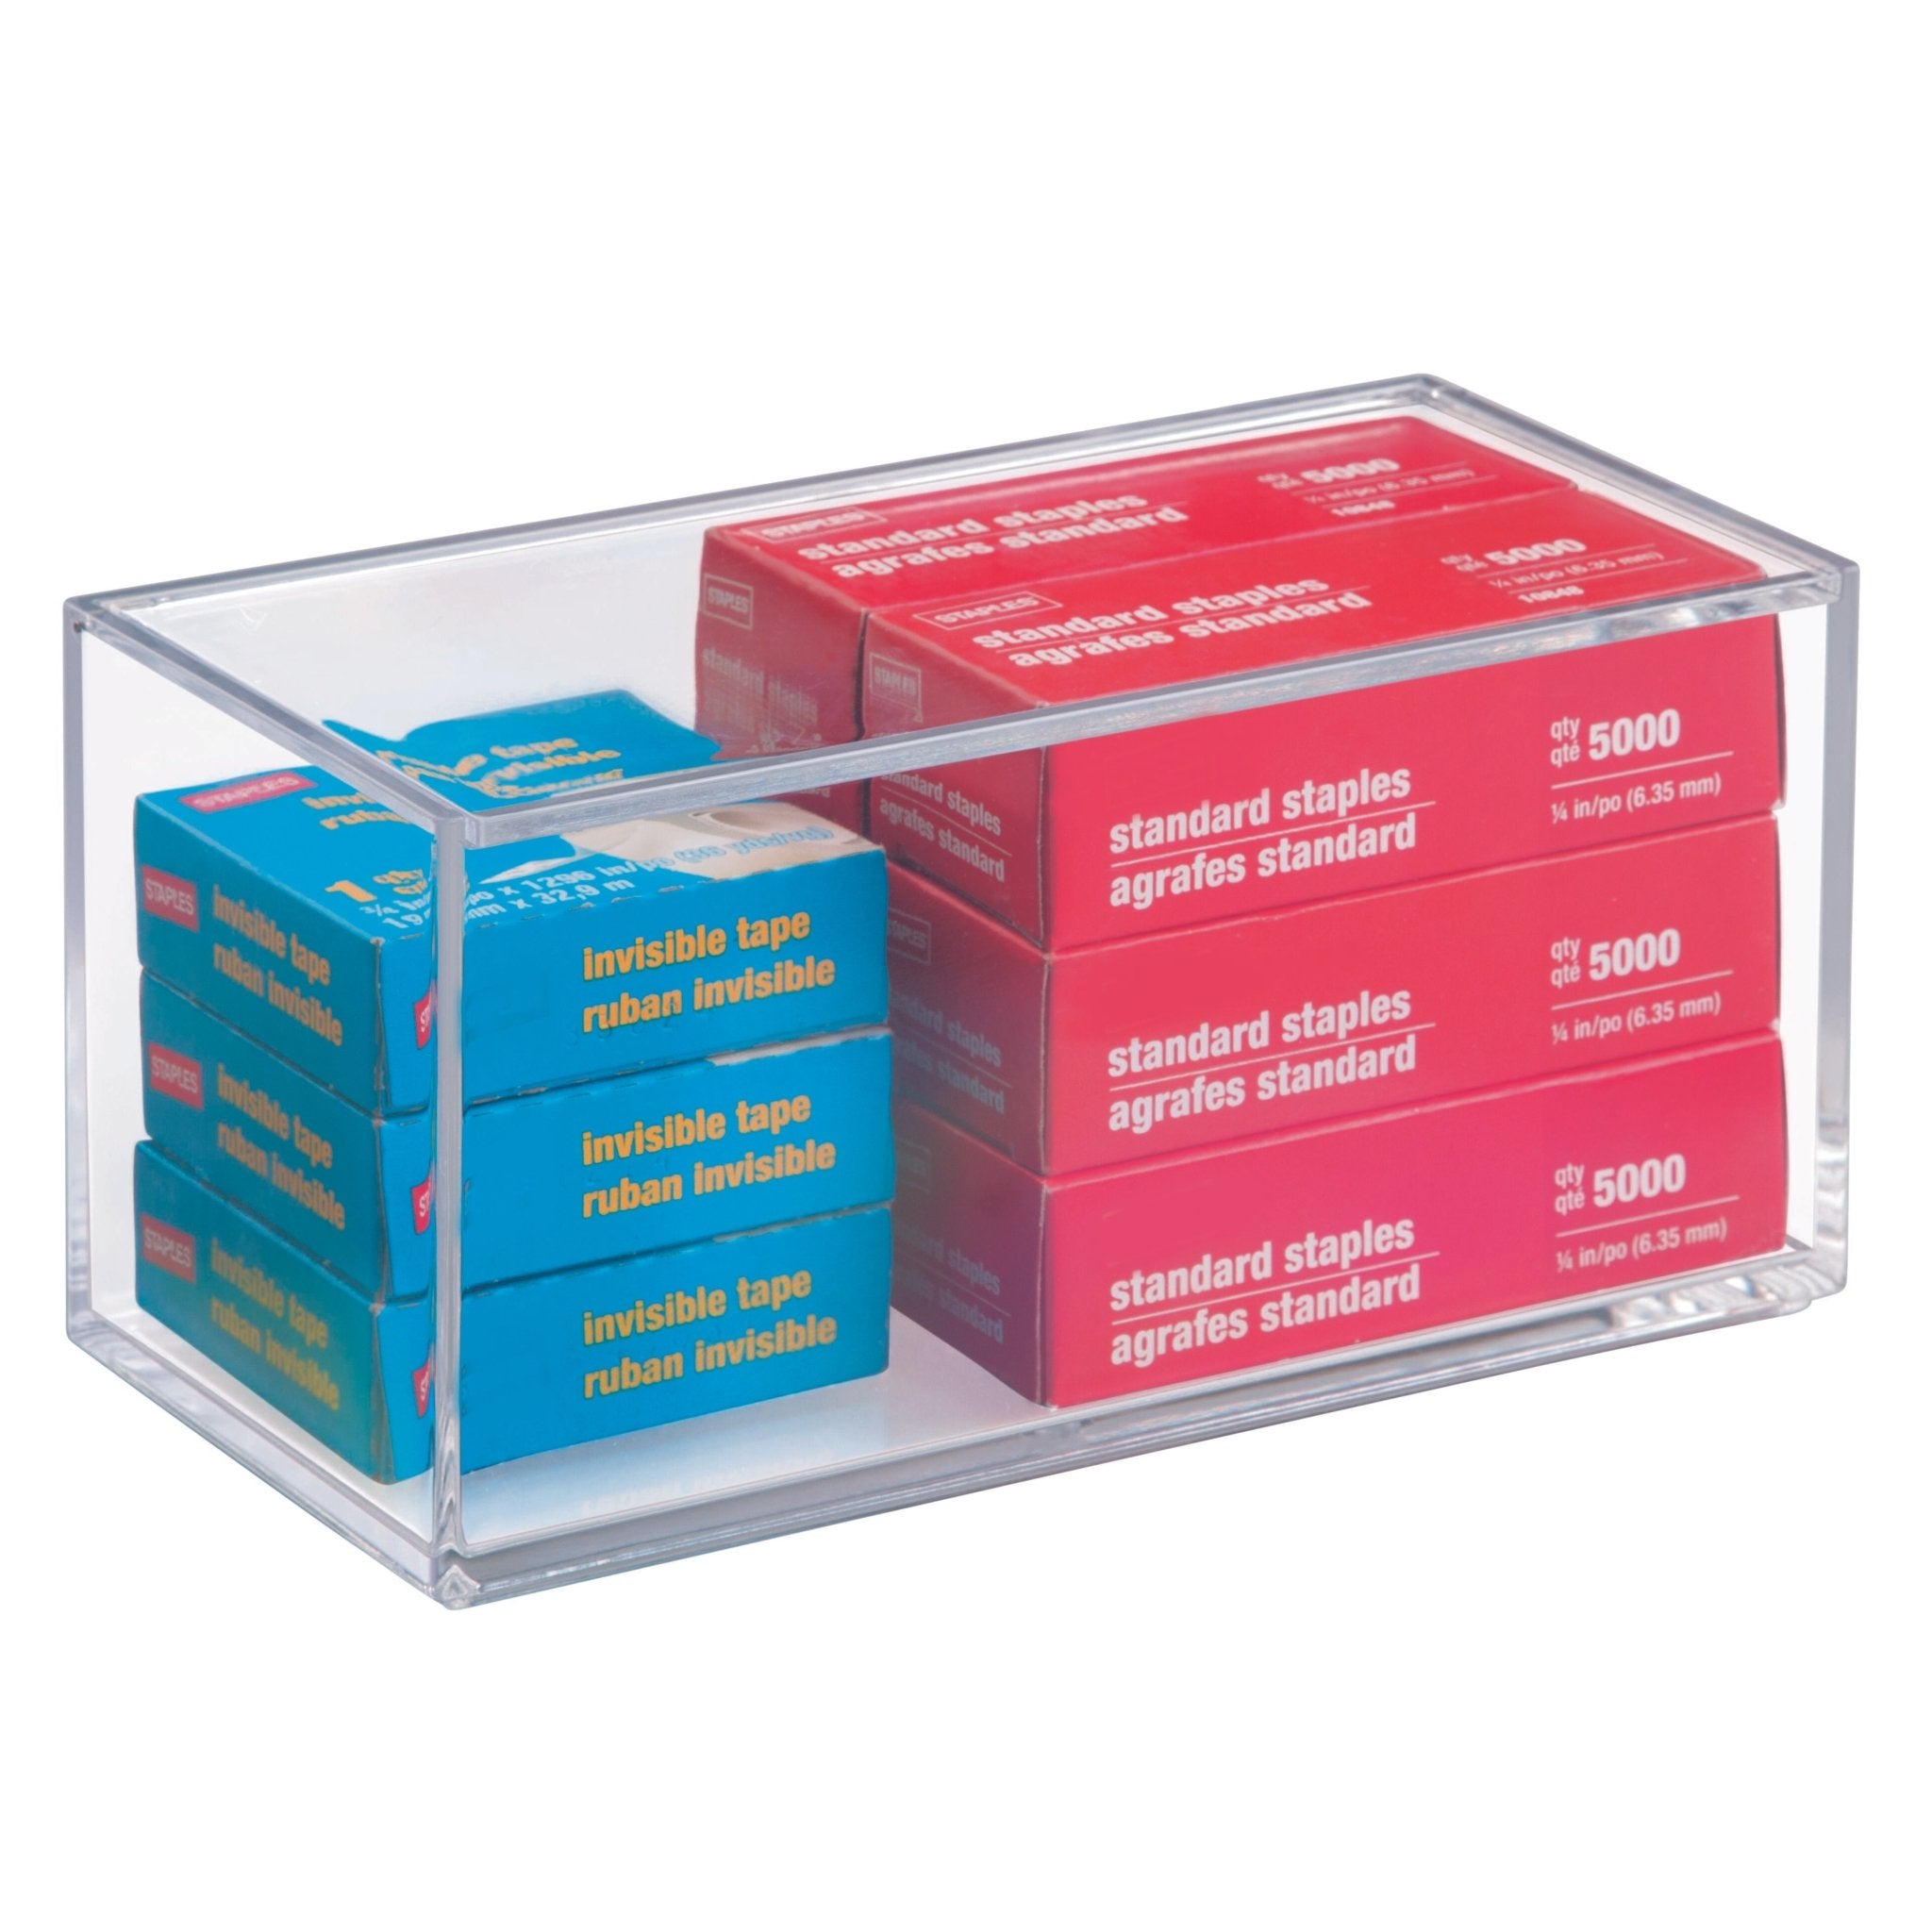 Idesign Clarity - Storage Box clear - with lid - BINS AND BOXES